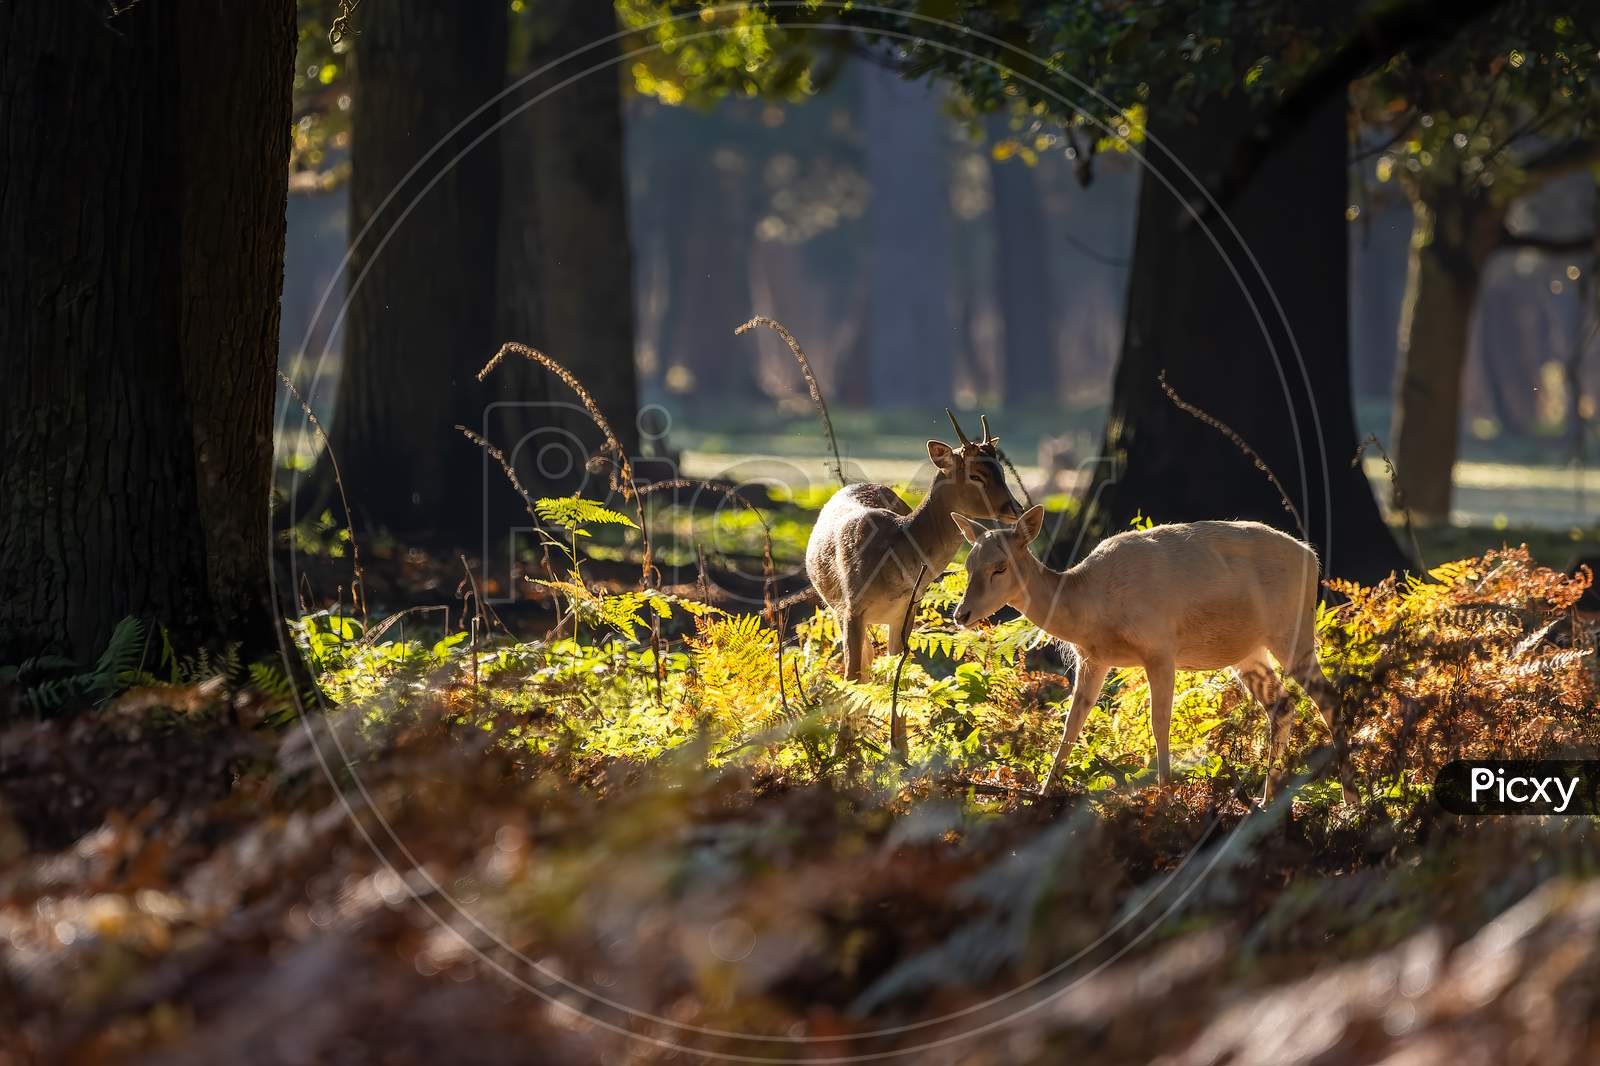 A female fallow deer walking through a forest at a cloudy day in autumn in Hesse, Germany.